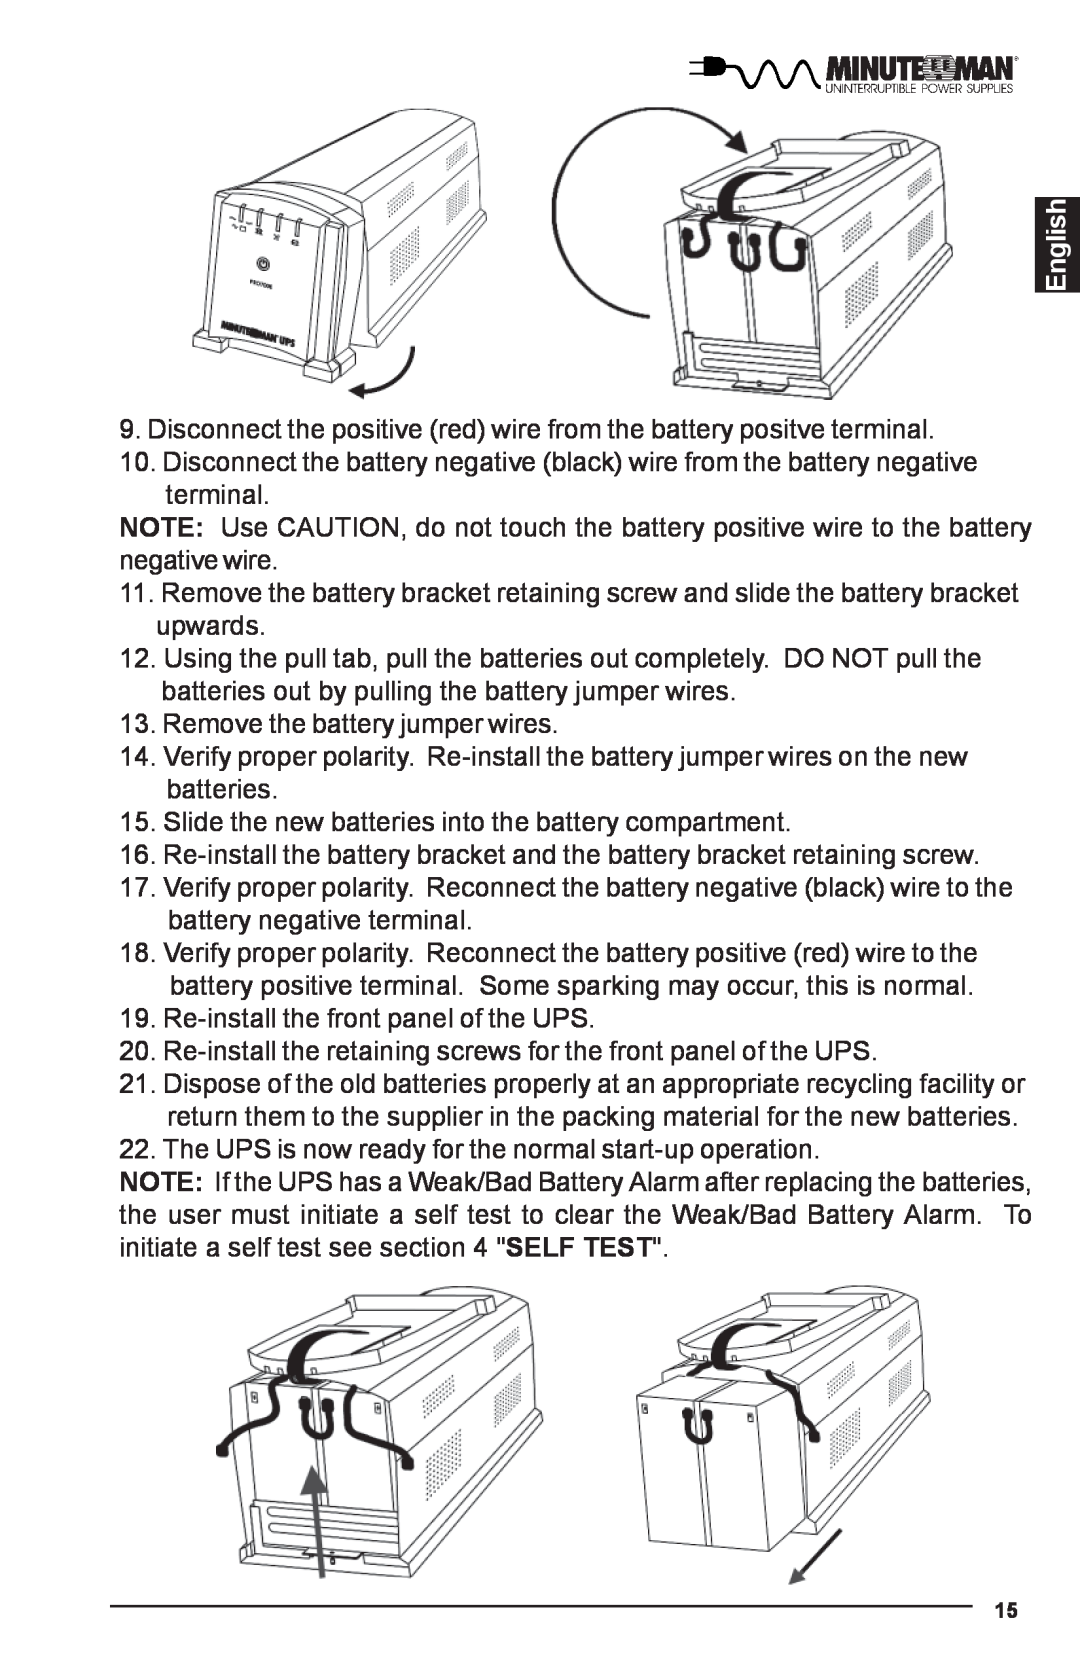 Minuteman UPS PRO-E user manual English, Disconnect the positive red wire from the battery positve terminal 